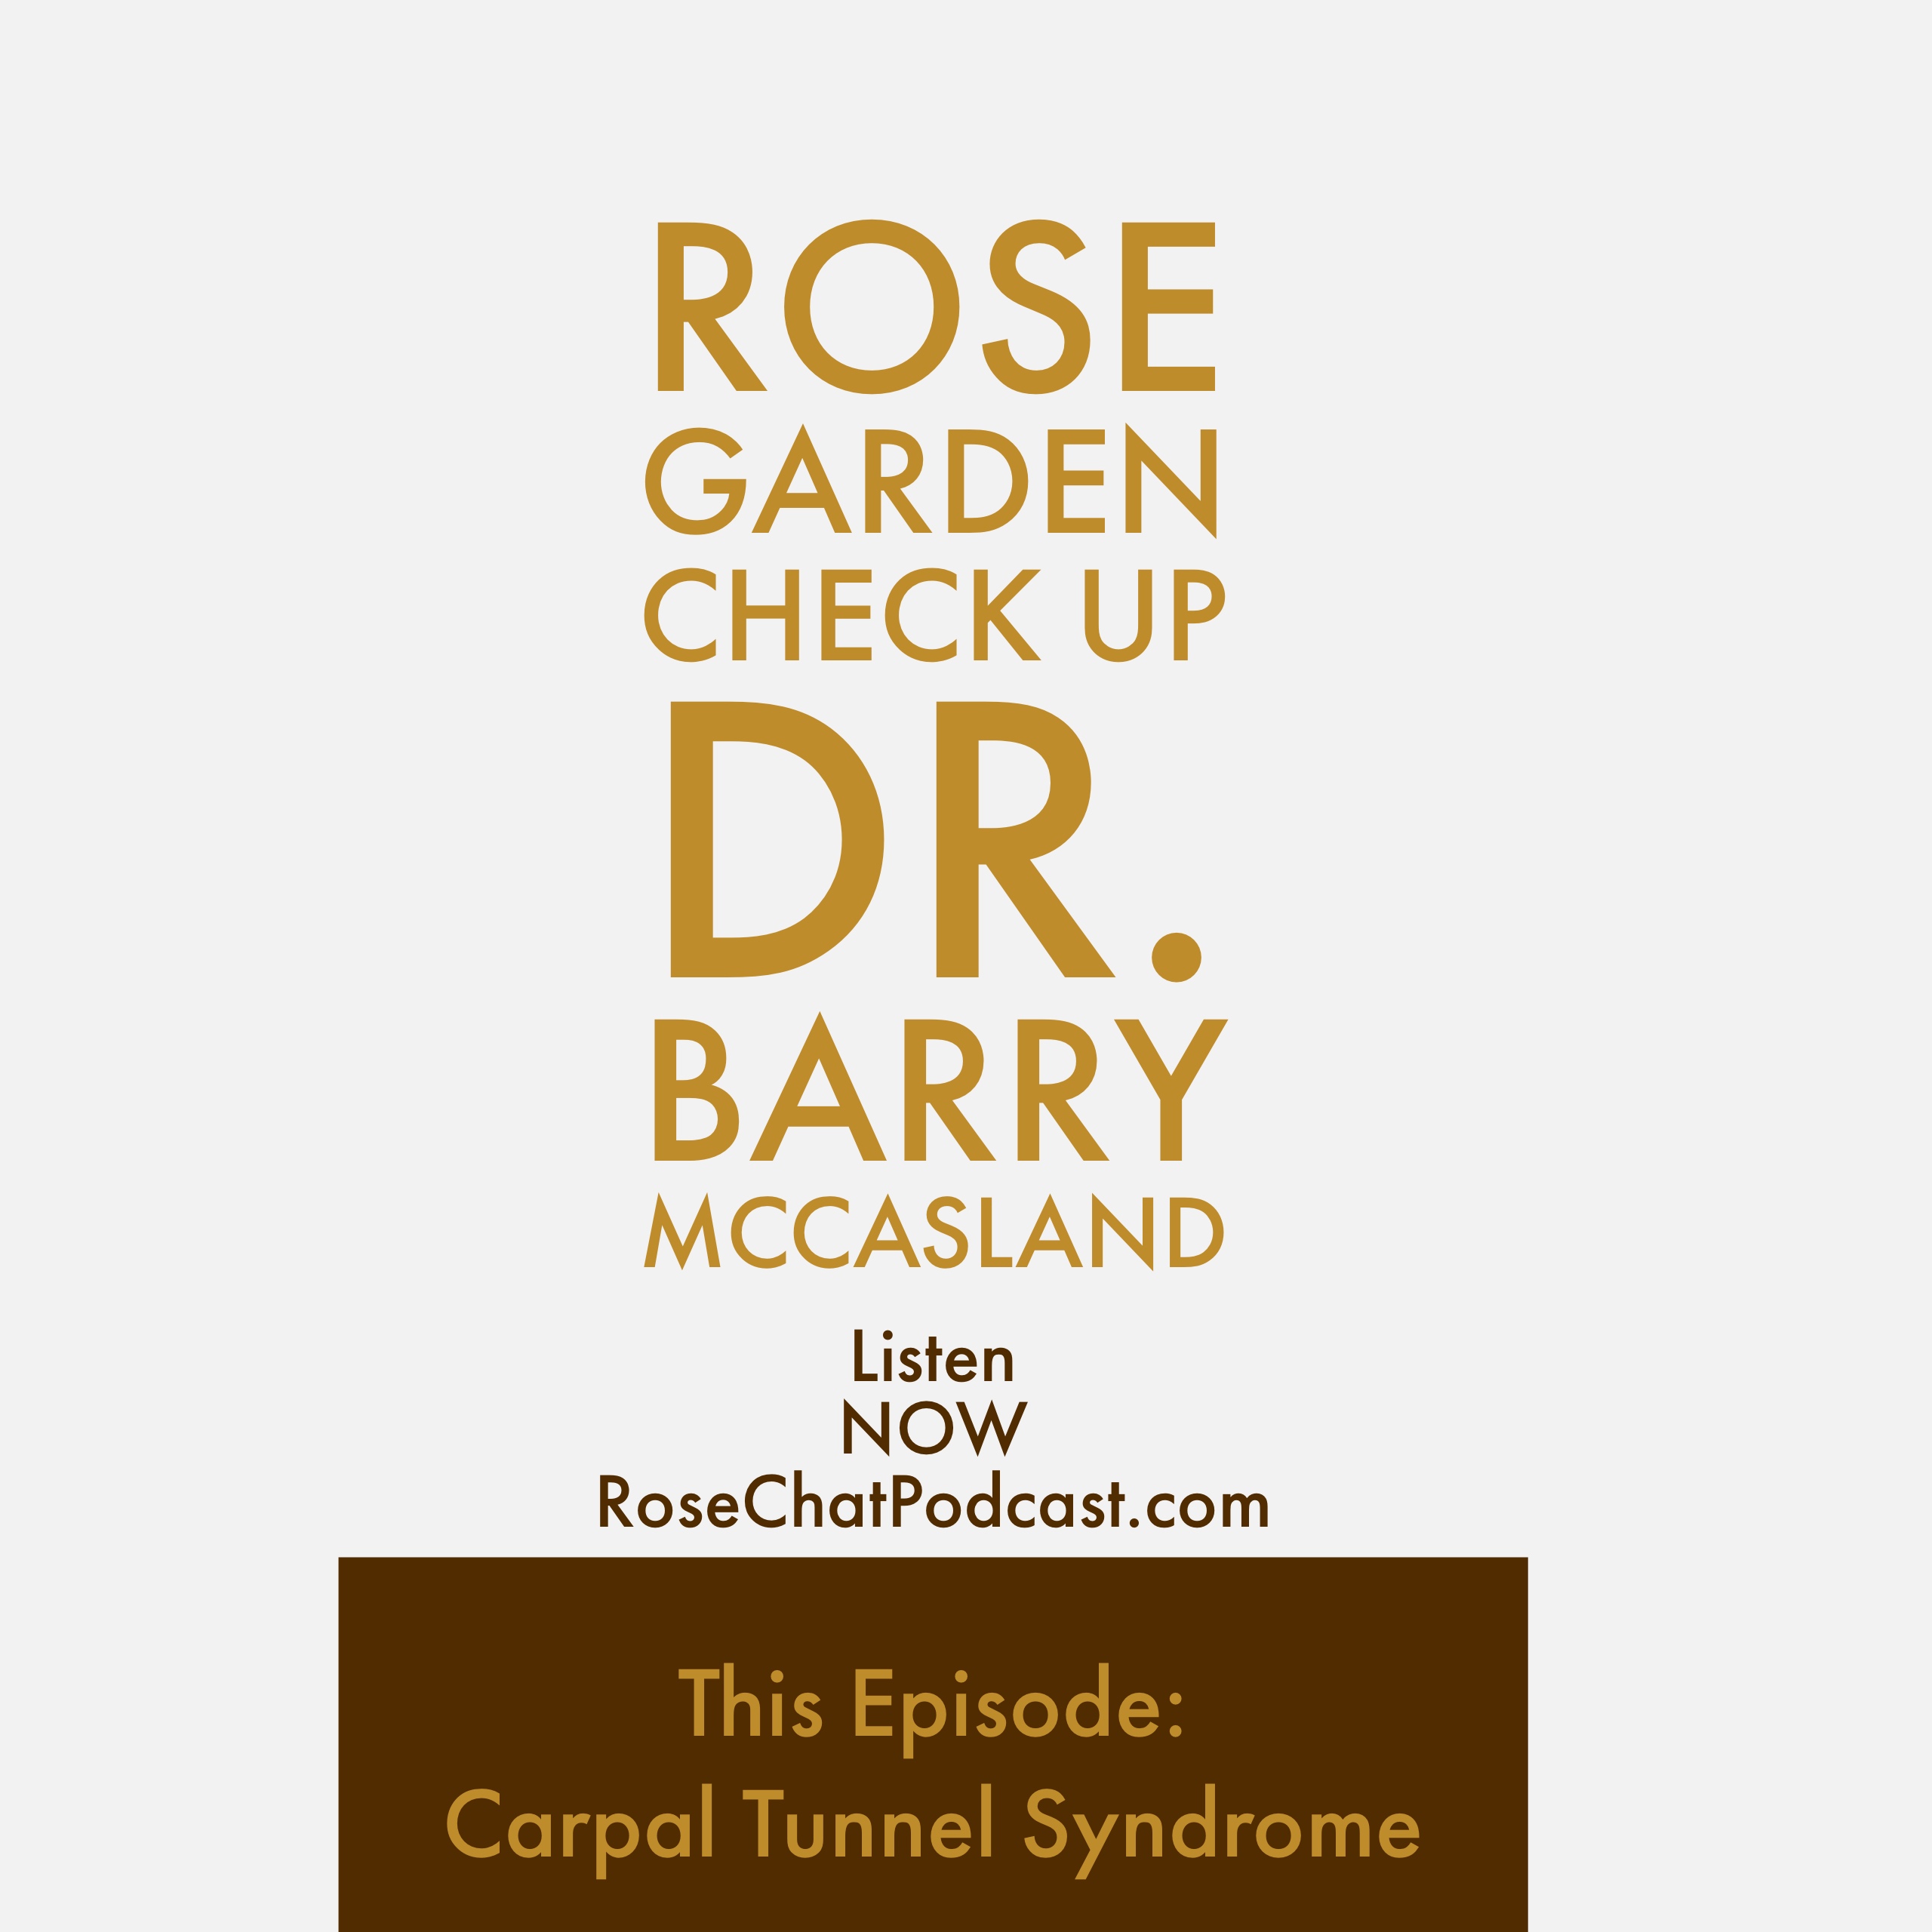 Carpal Tunnel Syndrome | Dr. Barry McCasland | Rose Garden Check Up